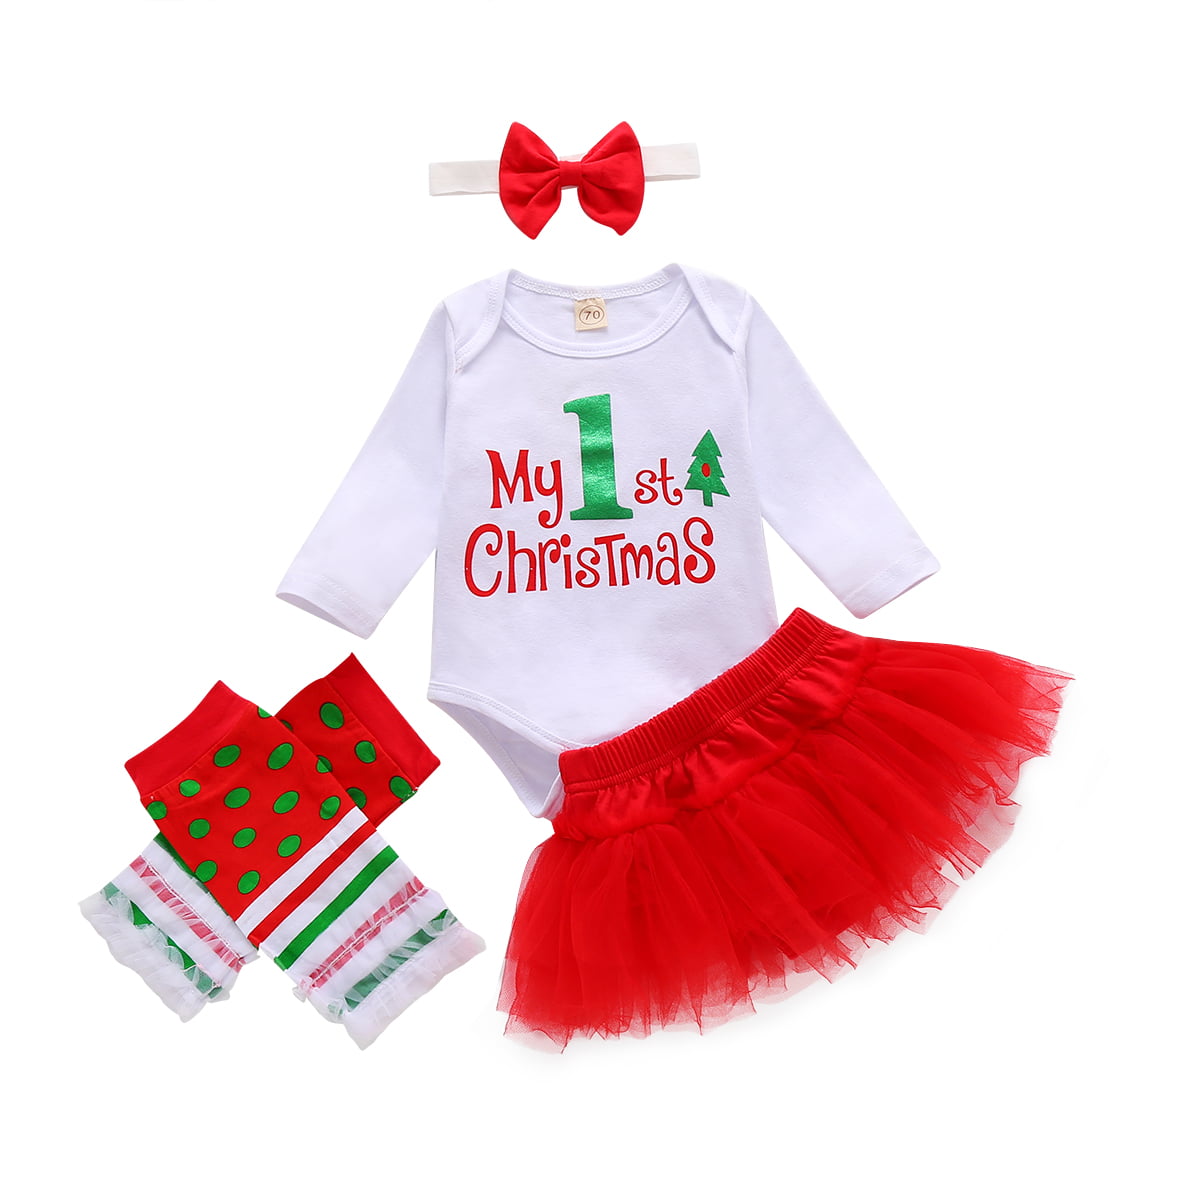 iEFiEL Newborn Baby Girls Romper Tutu Dress Infant Christmas Outfit Party Costume 18 Months, White&Red 